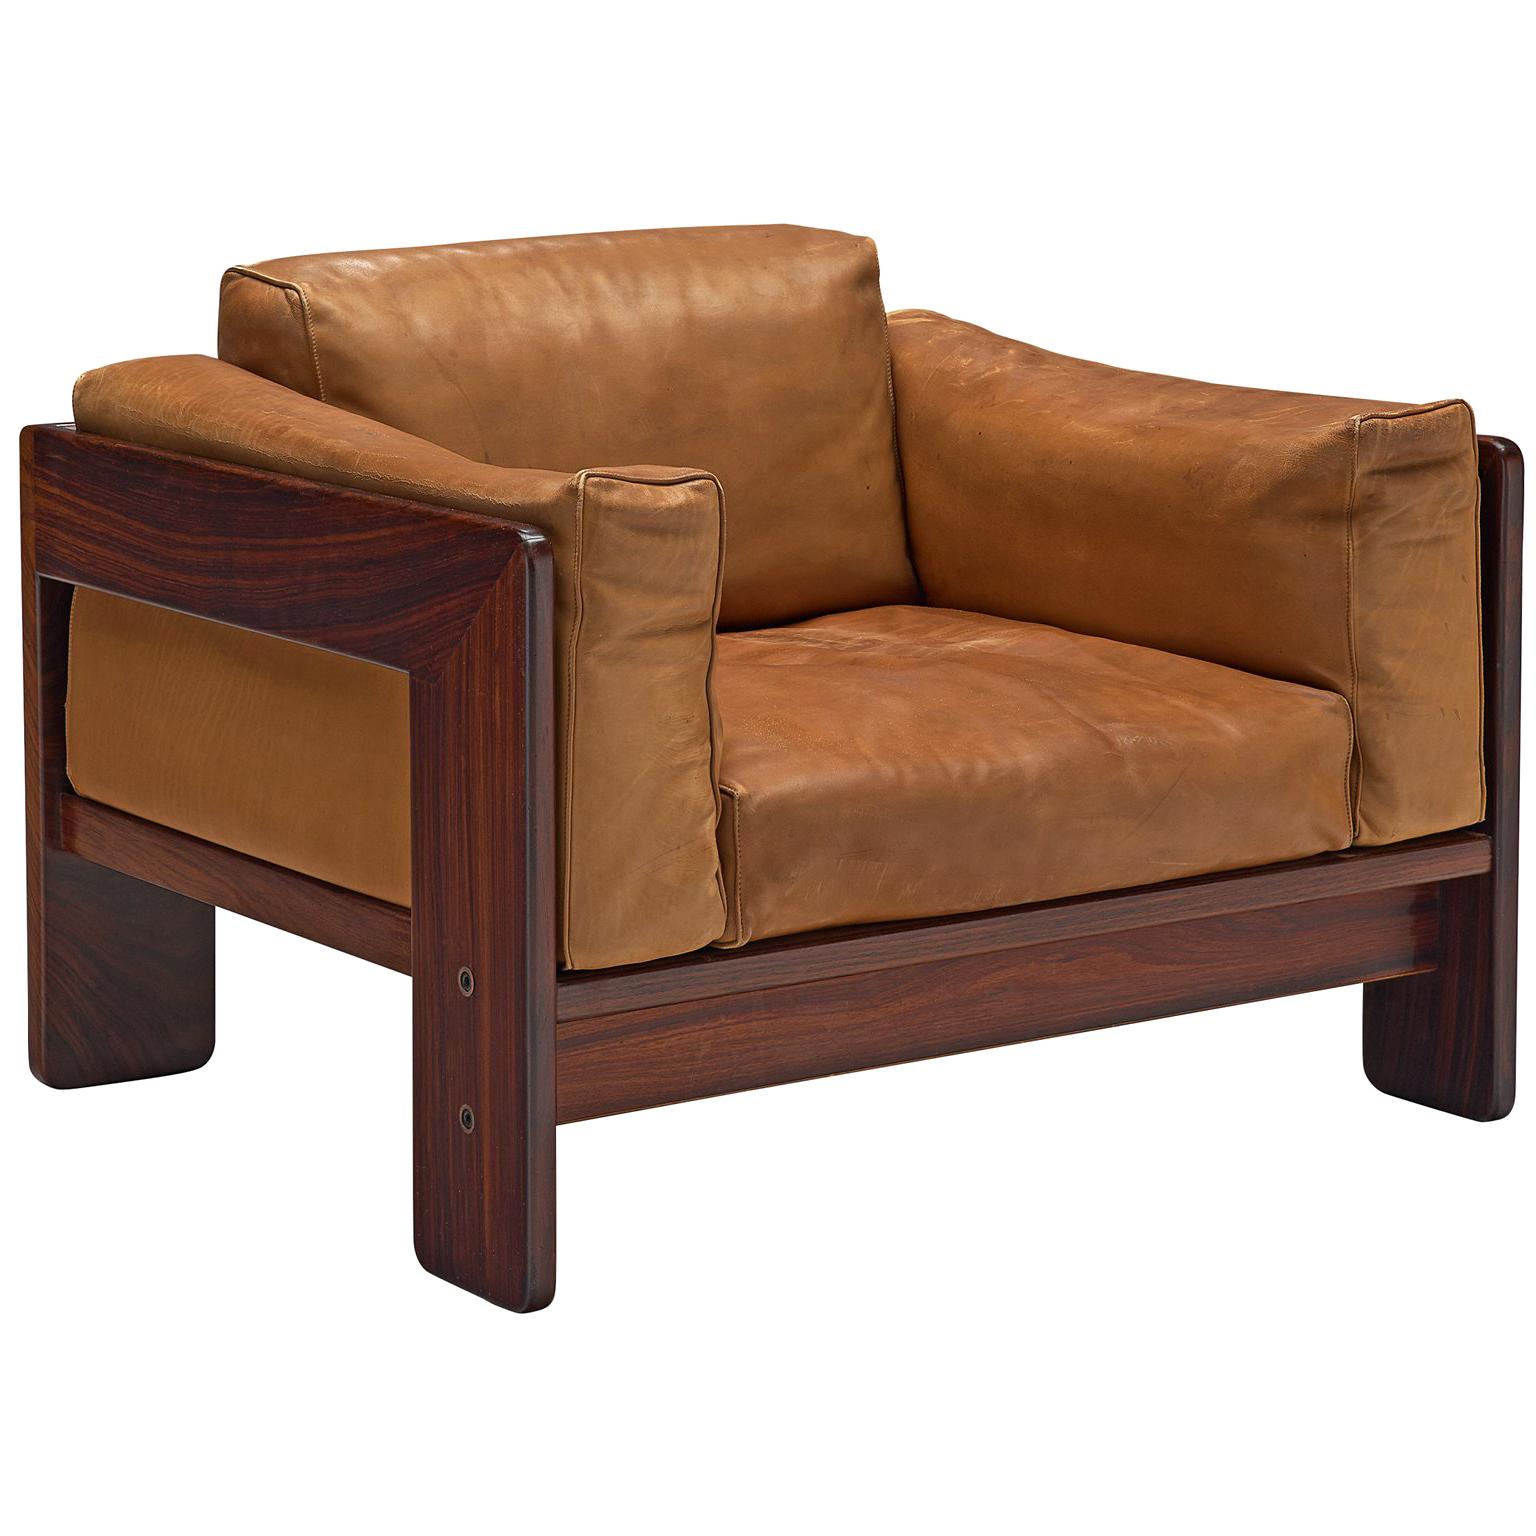 Tobia Scarpa 'Bastiano' Club Chair in Rosewood and Cognac Leather